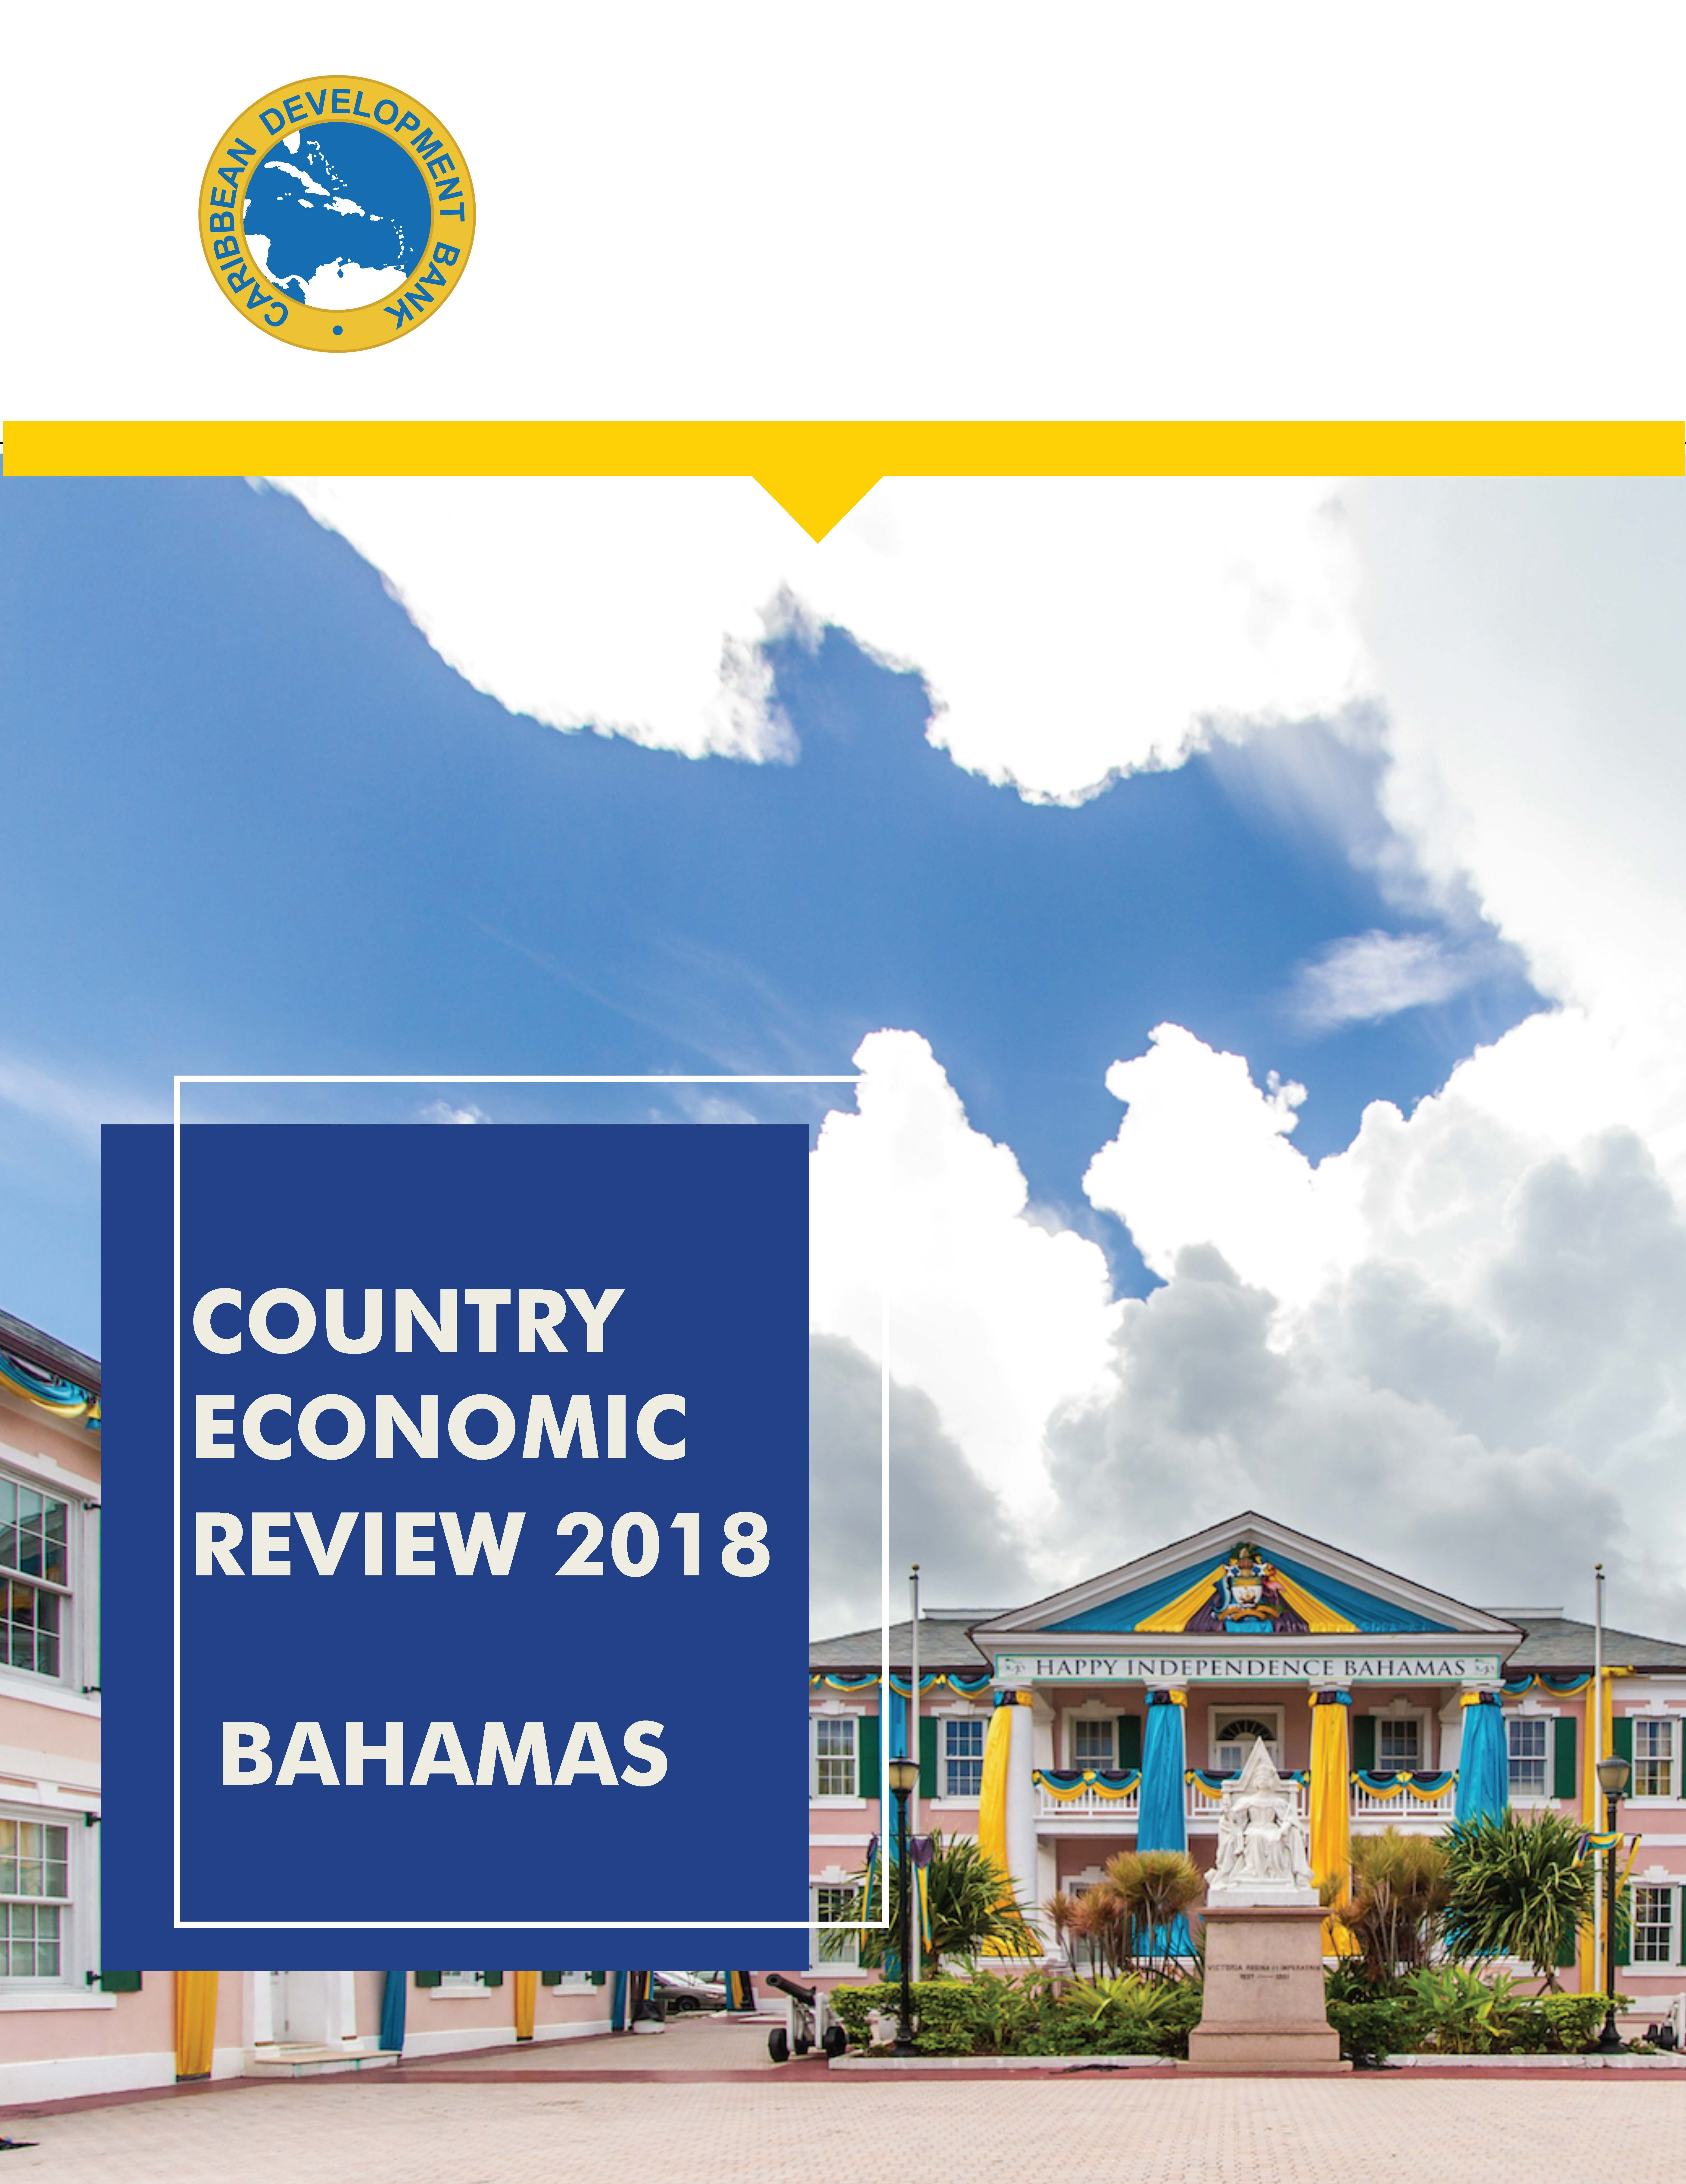 cover of 2018 Economic Review for The Bahamas showing Parliament Square in Nassau, Bahamas decorated for independence in blue and yellow